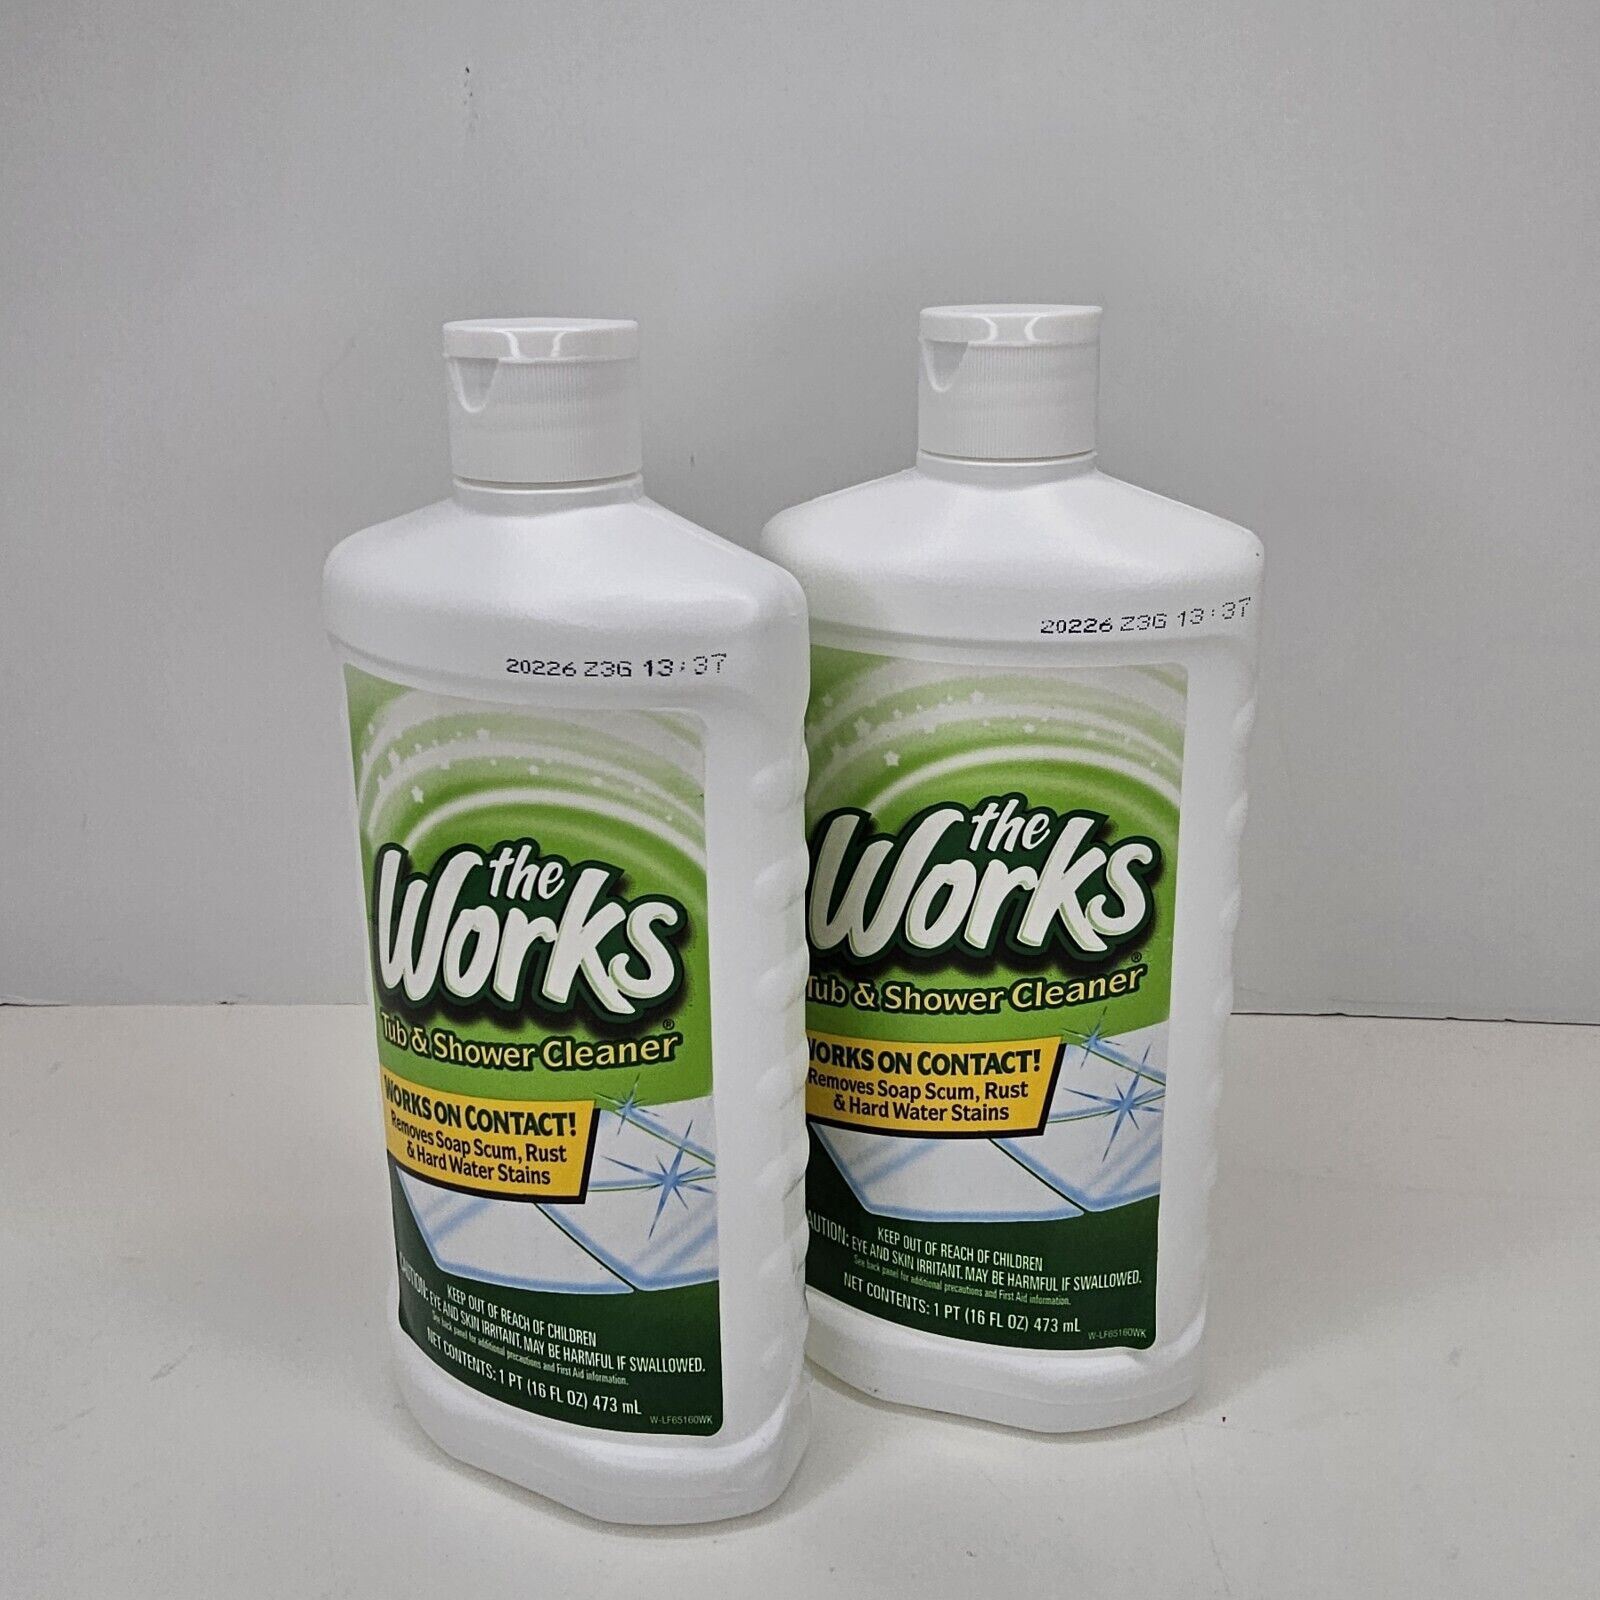 The Works Original Green Bottle, Tub And Shower Cleaner 2 Pack 16 oz each